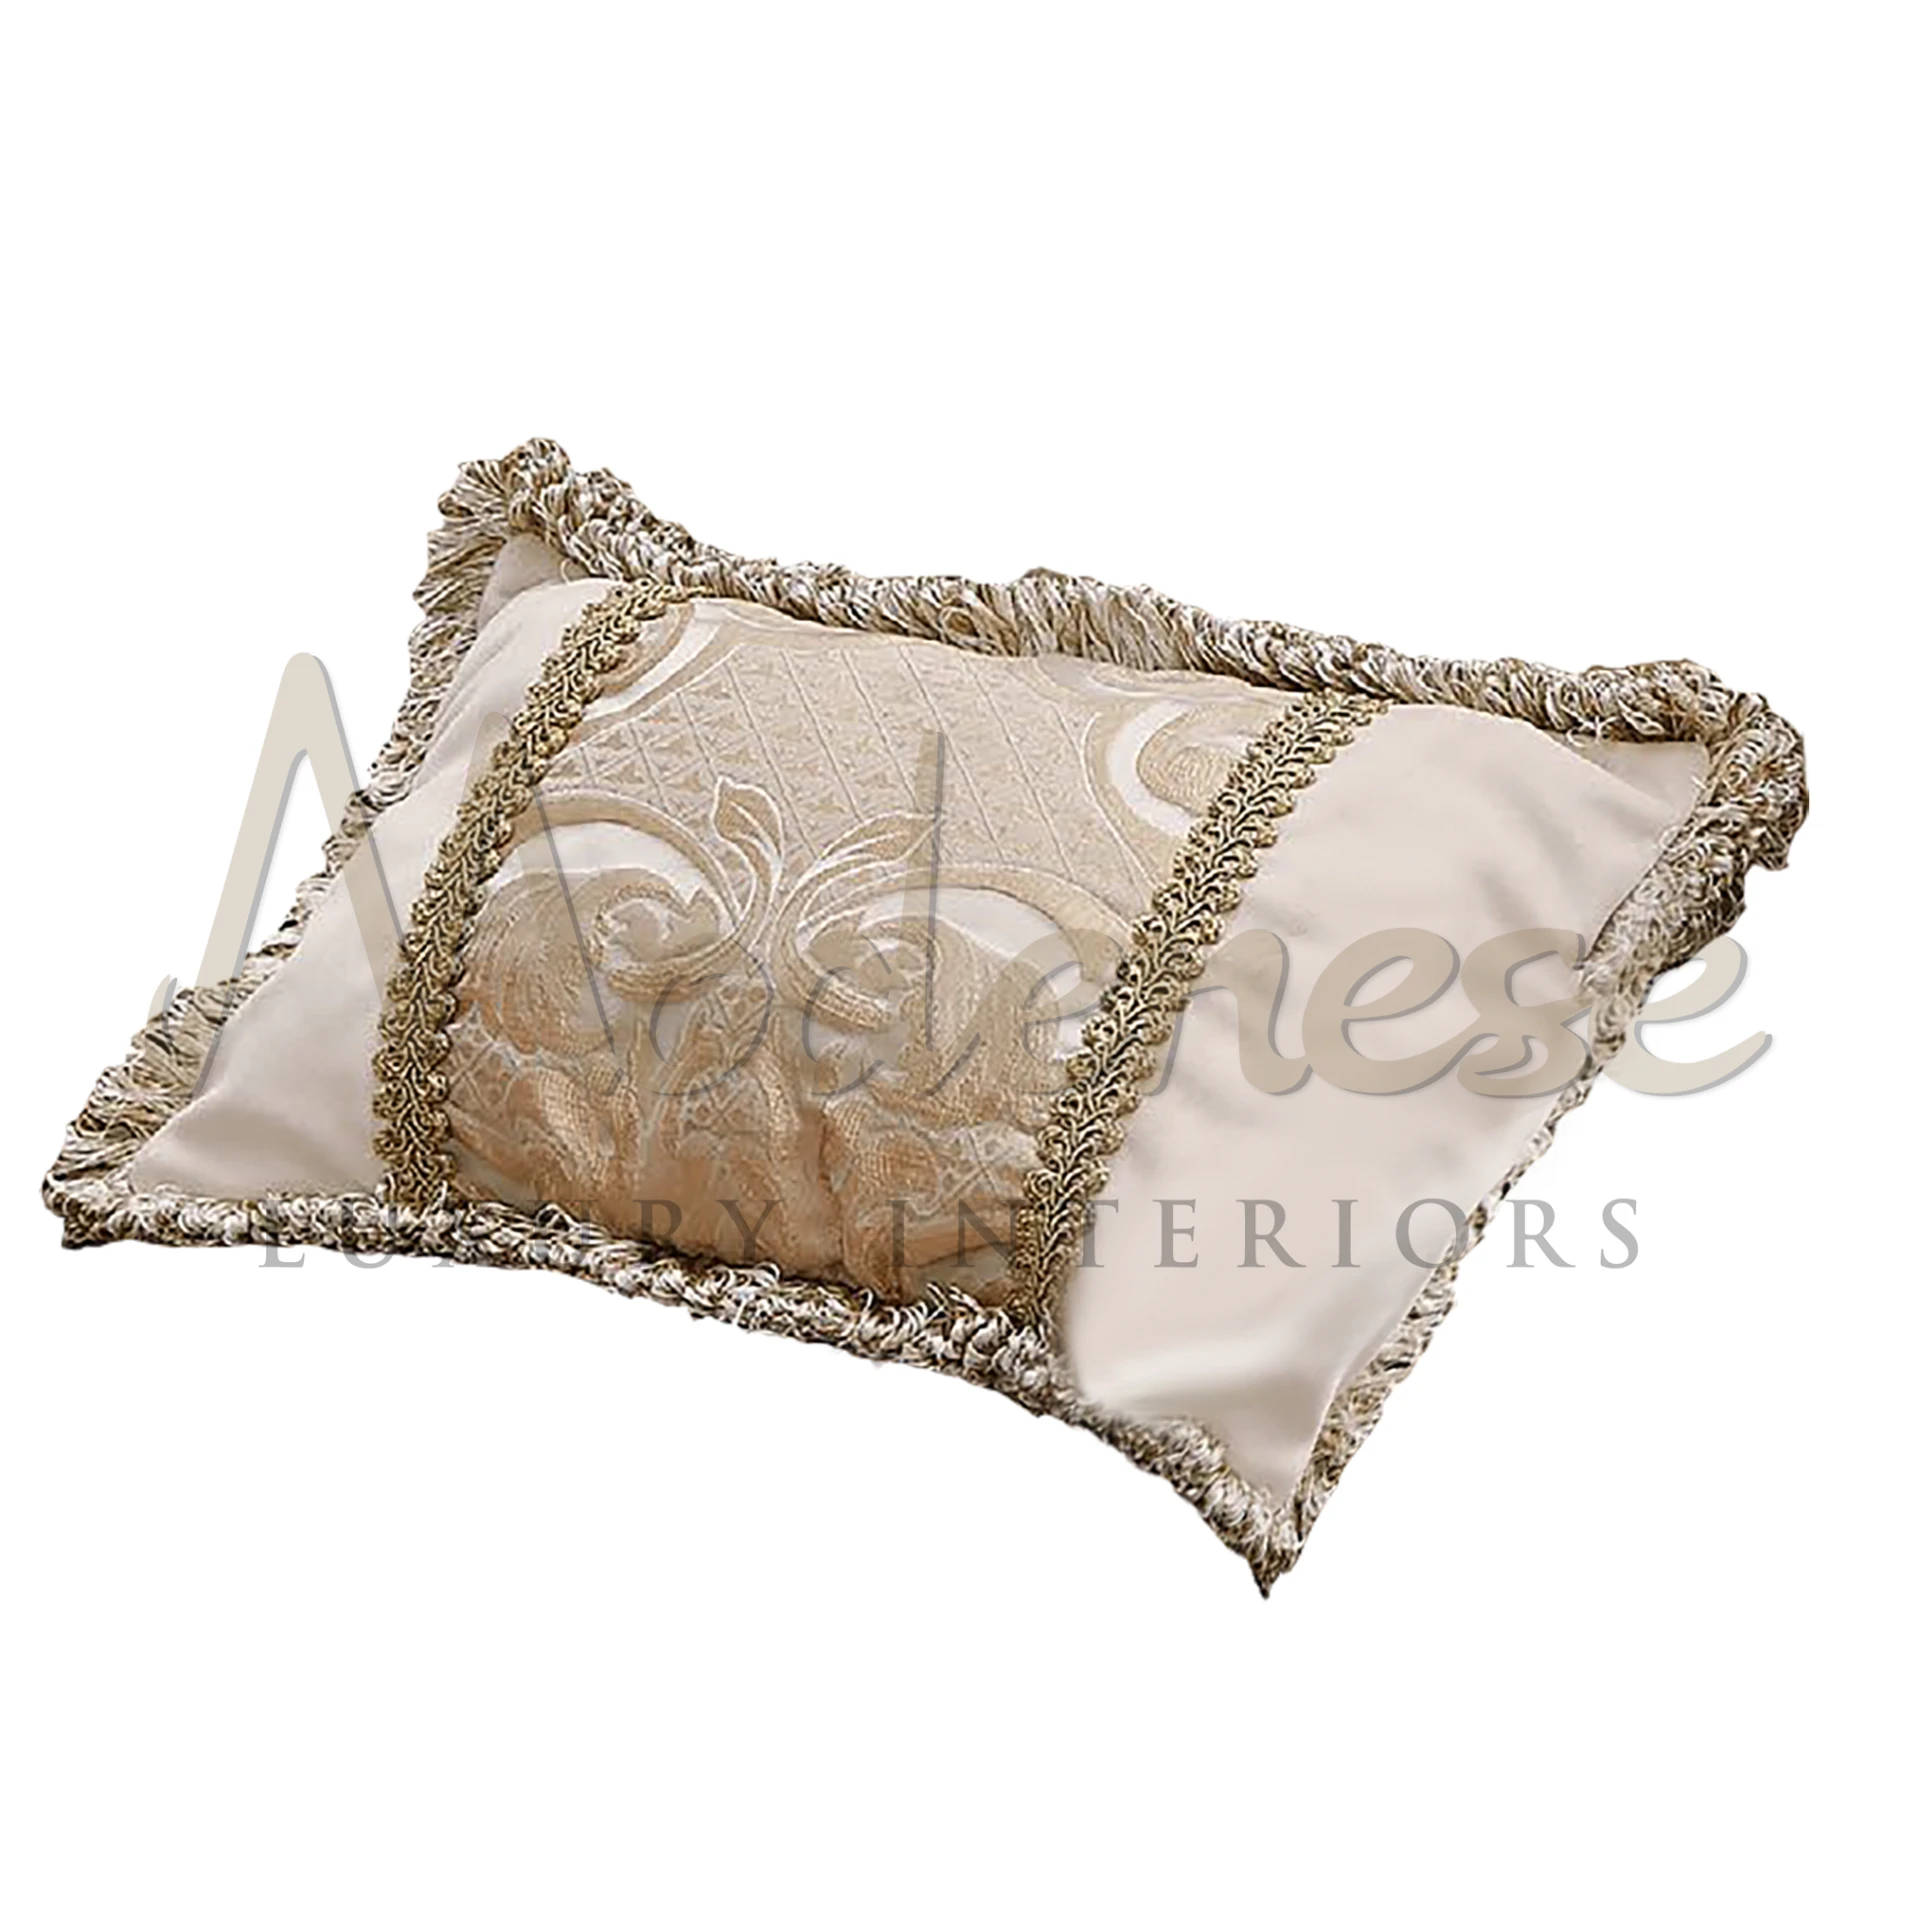 Experience the pinnacle of luxury textiles with our Deluxe Modenese Pillow from Modenese Furniture.